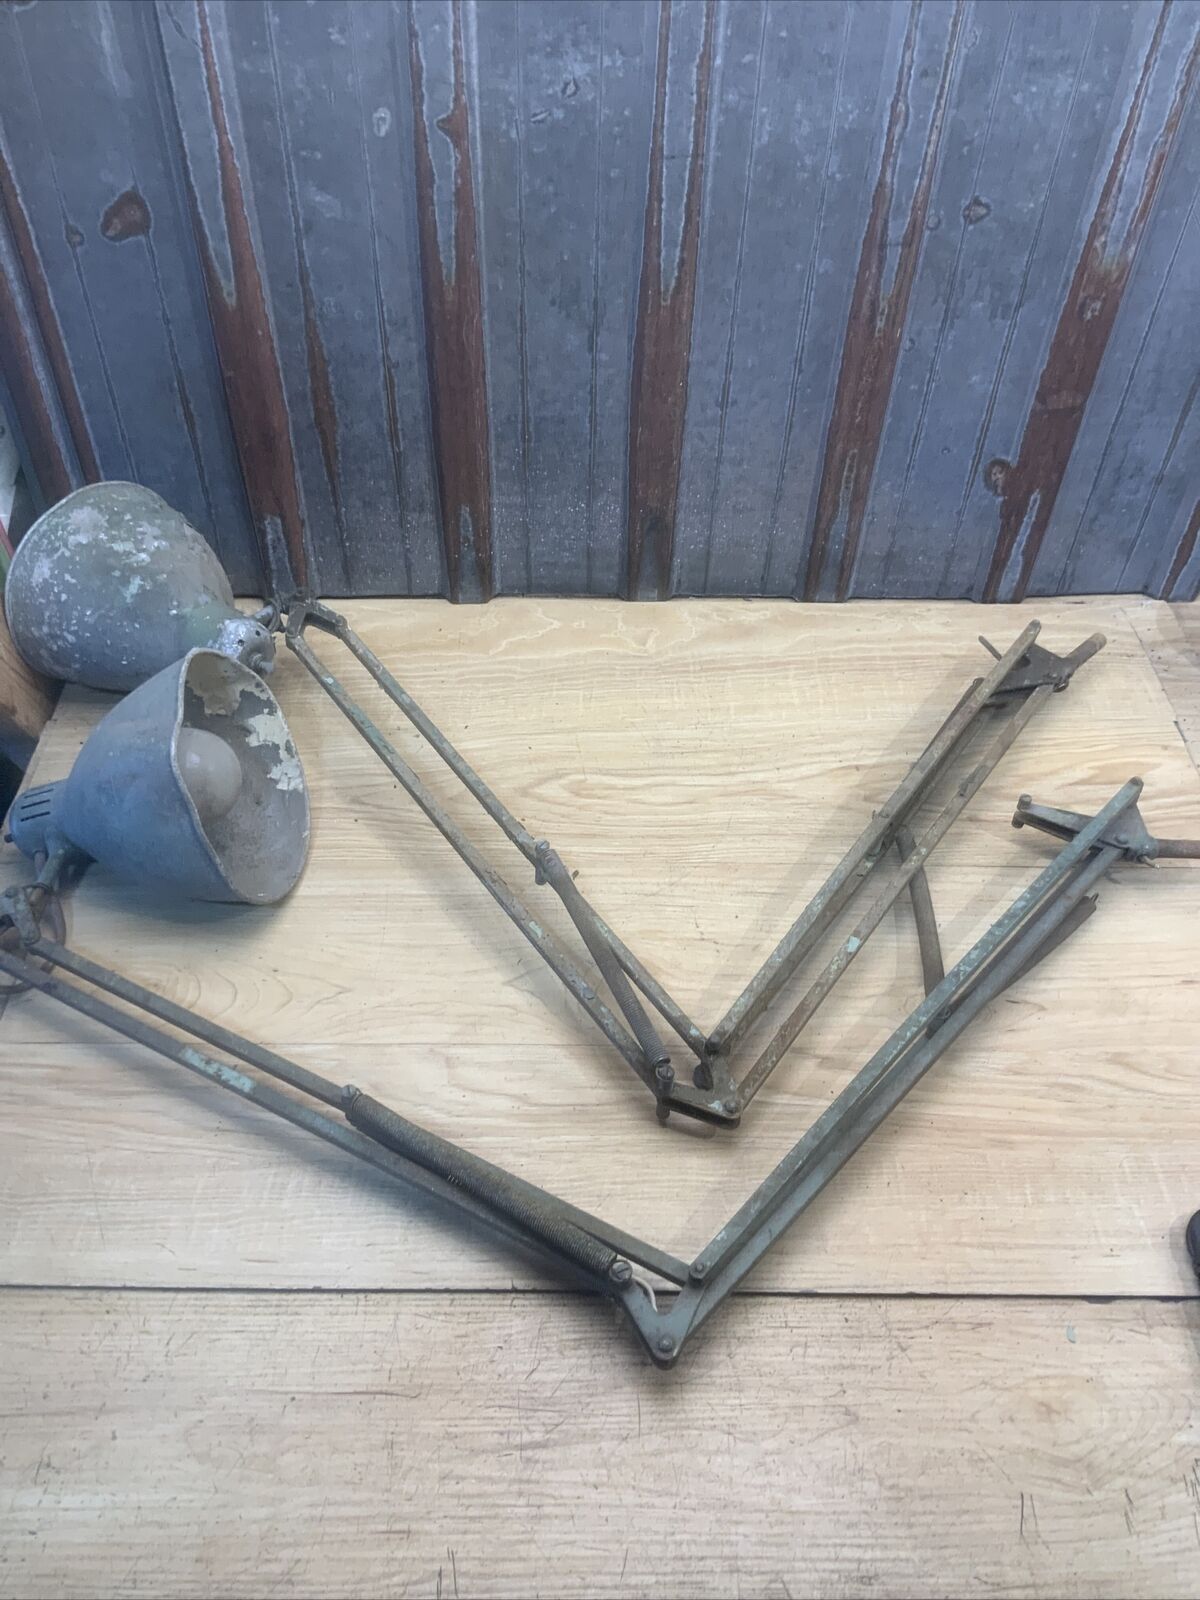 2 Vintage Industrial Articulating Lamps Parts Only Salvage ￼ Repurpose